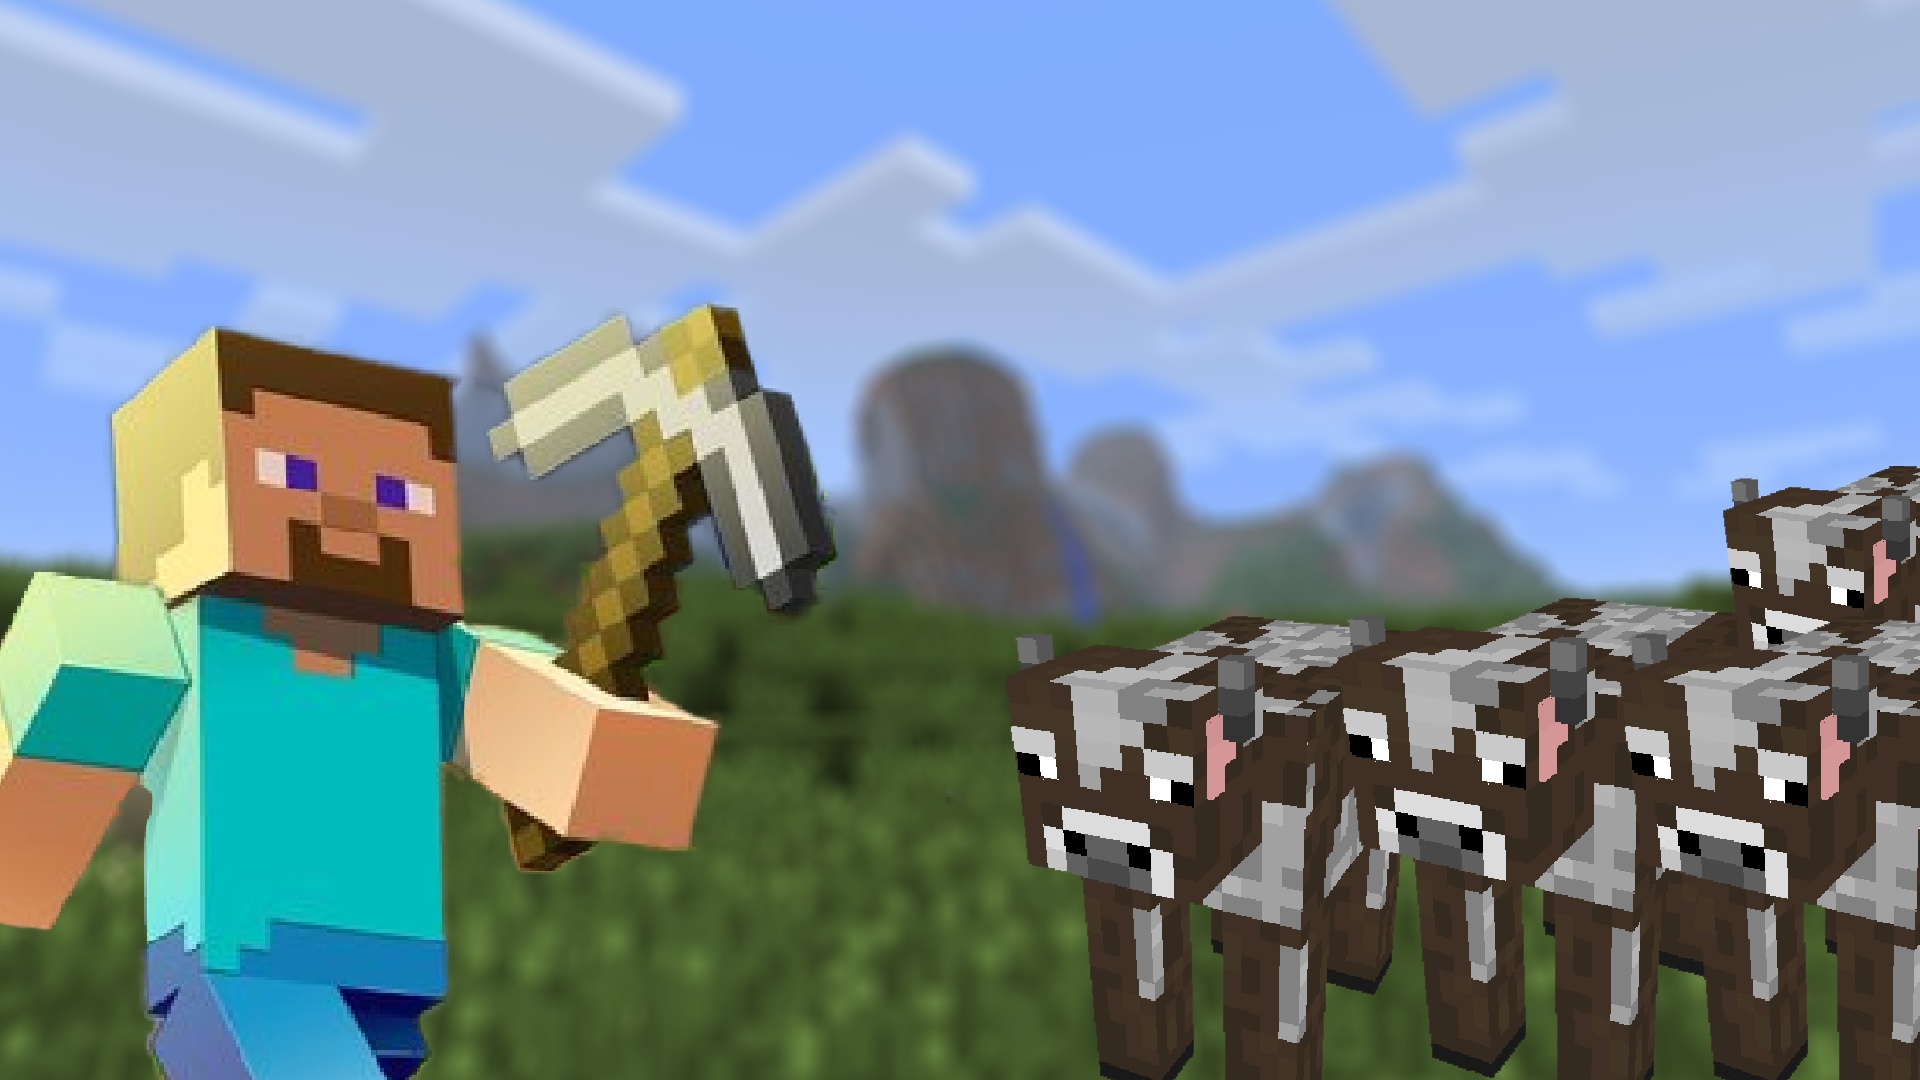 Minecraft: 100 cows and a rowboat are causing enthusiasm